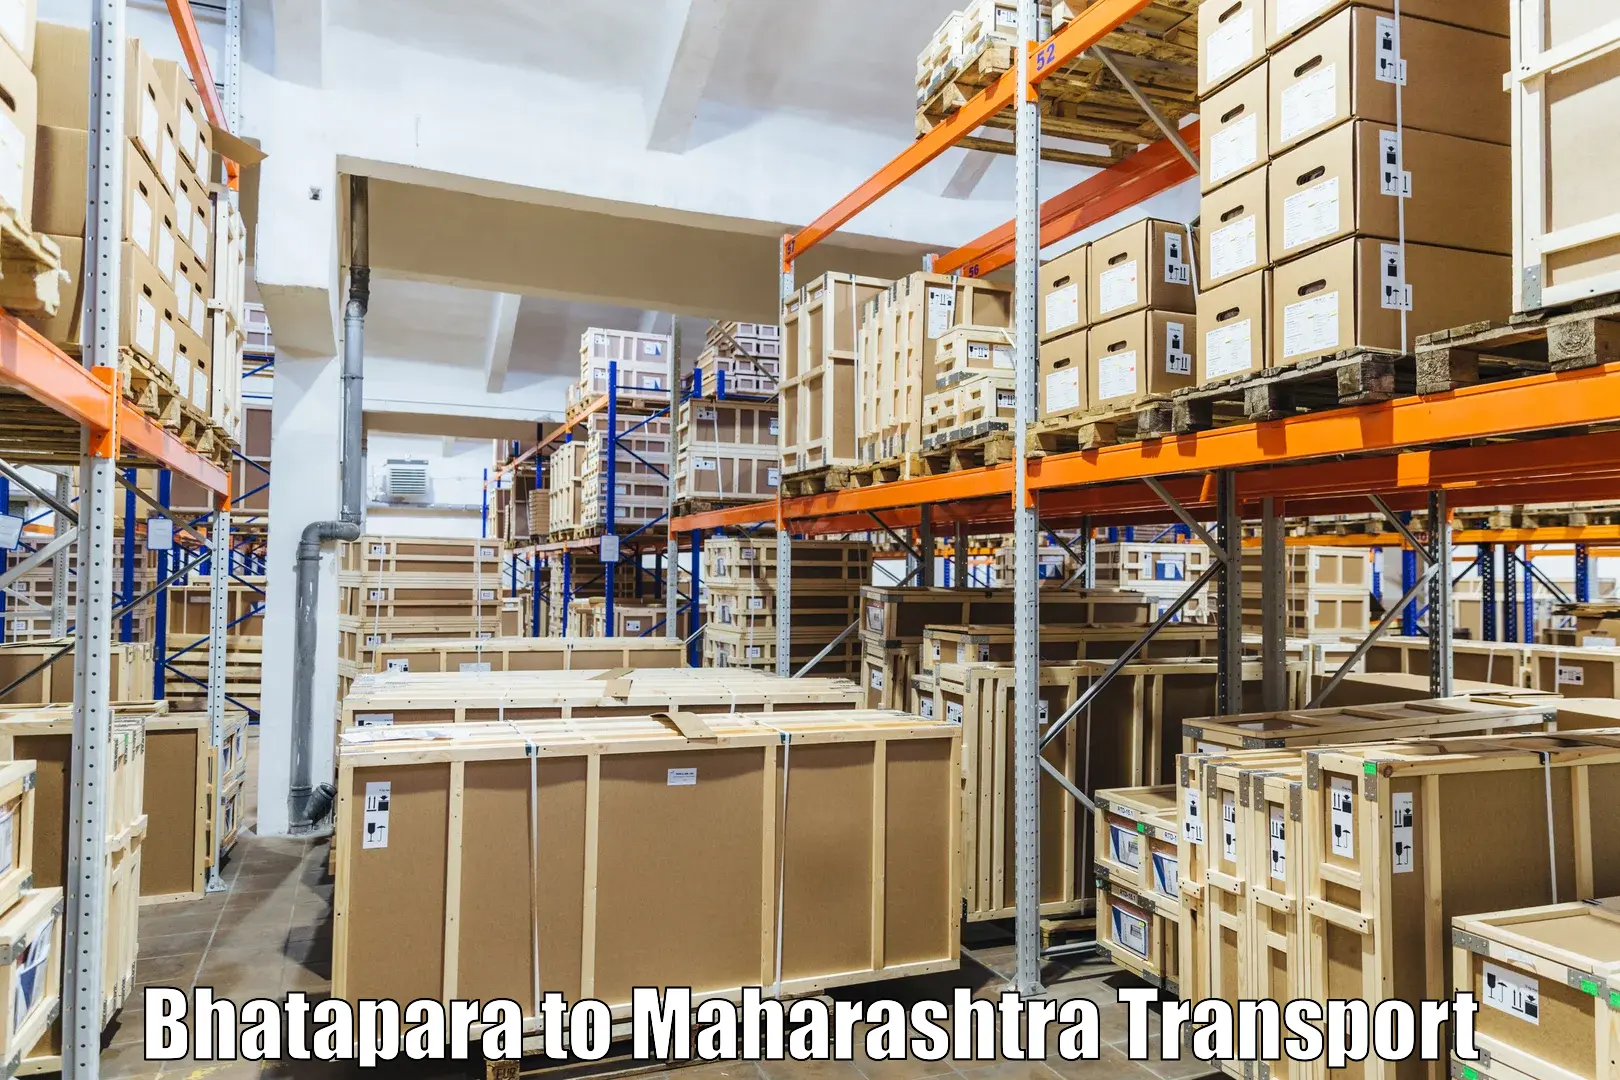 Transport shared services in Bhatapara to Chembur